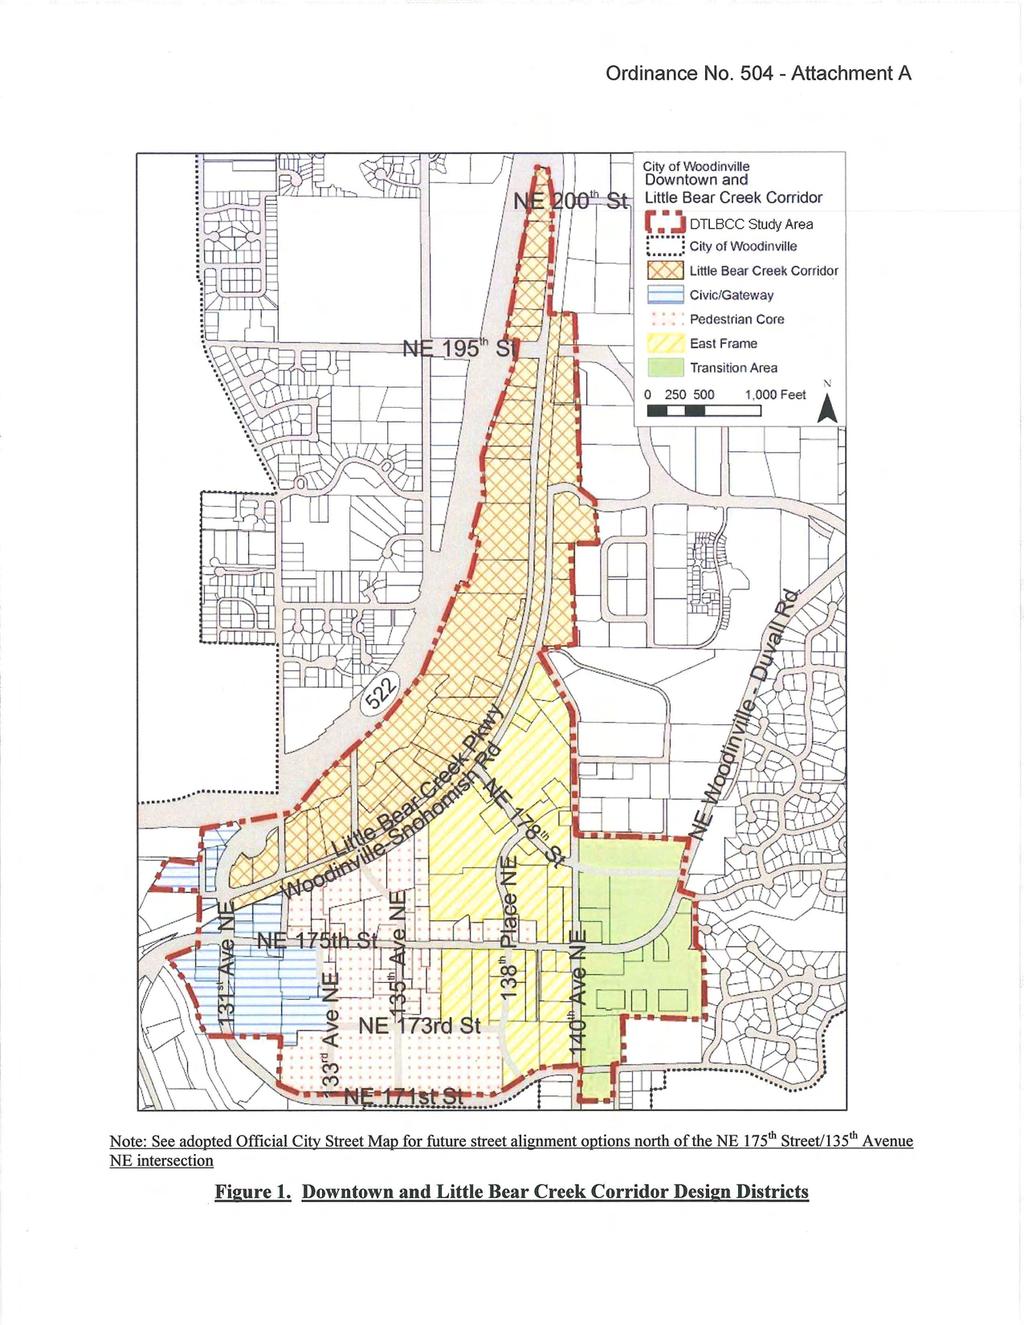 Ordinance No. 504 - Attachment A City of Woodinville Downtown and Little Bear Creek Corridor r:1 DTLBCC Study Area : : City of Woodinville.